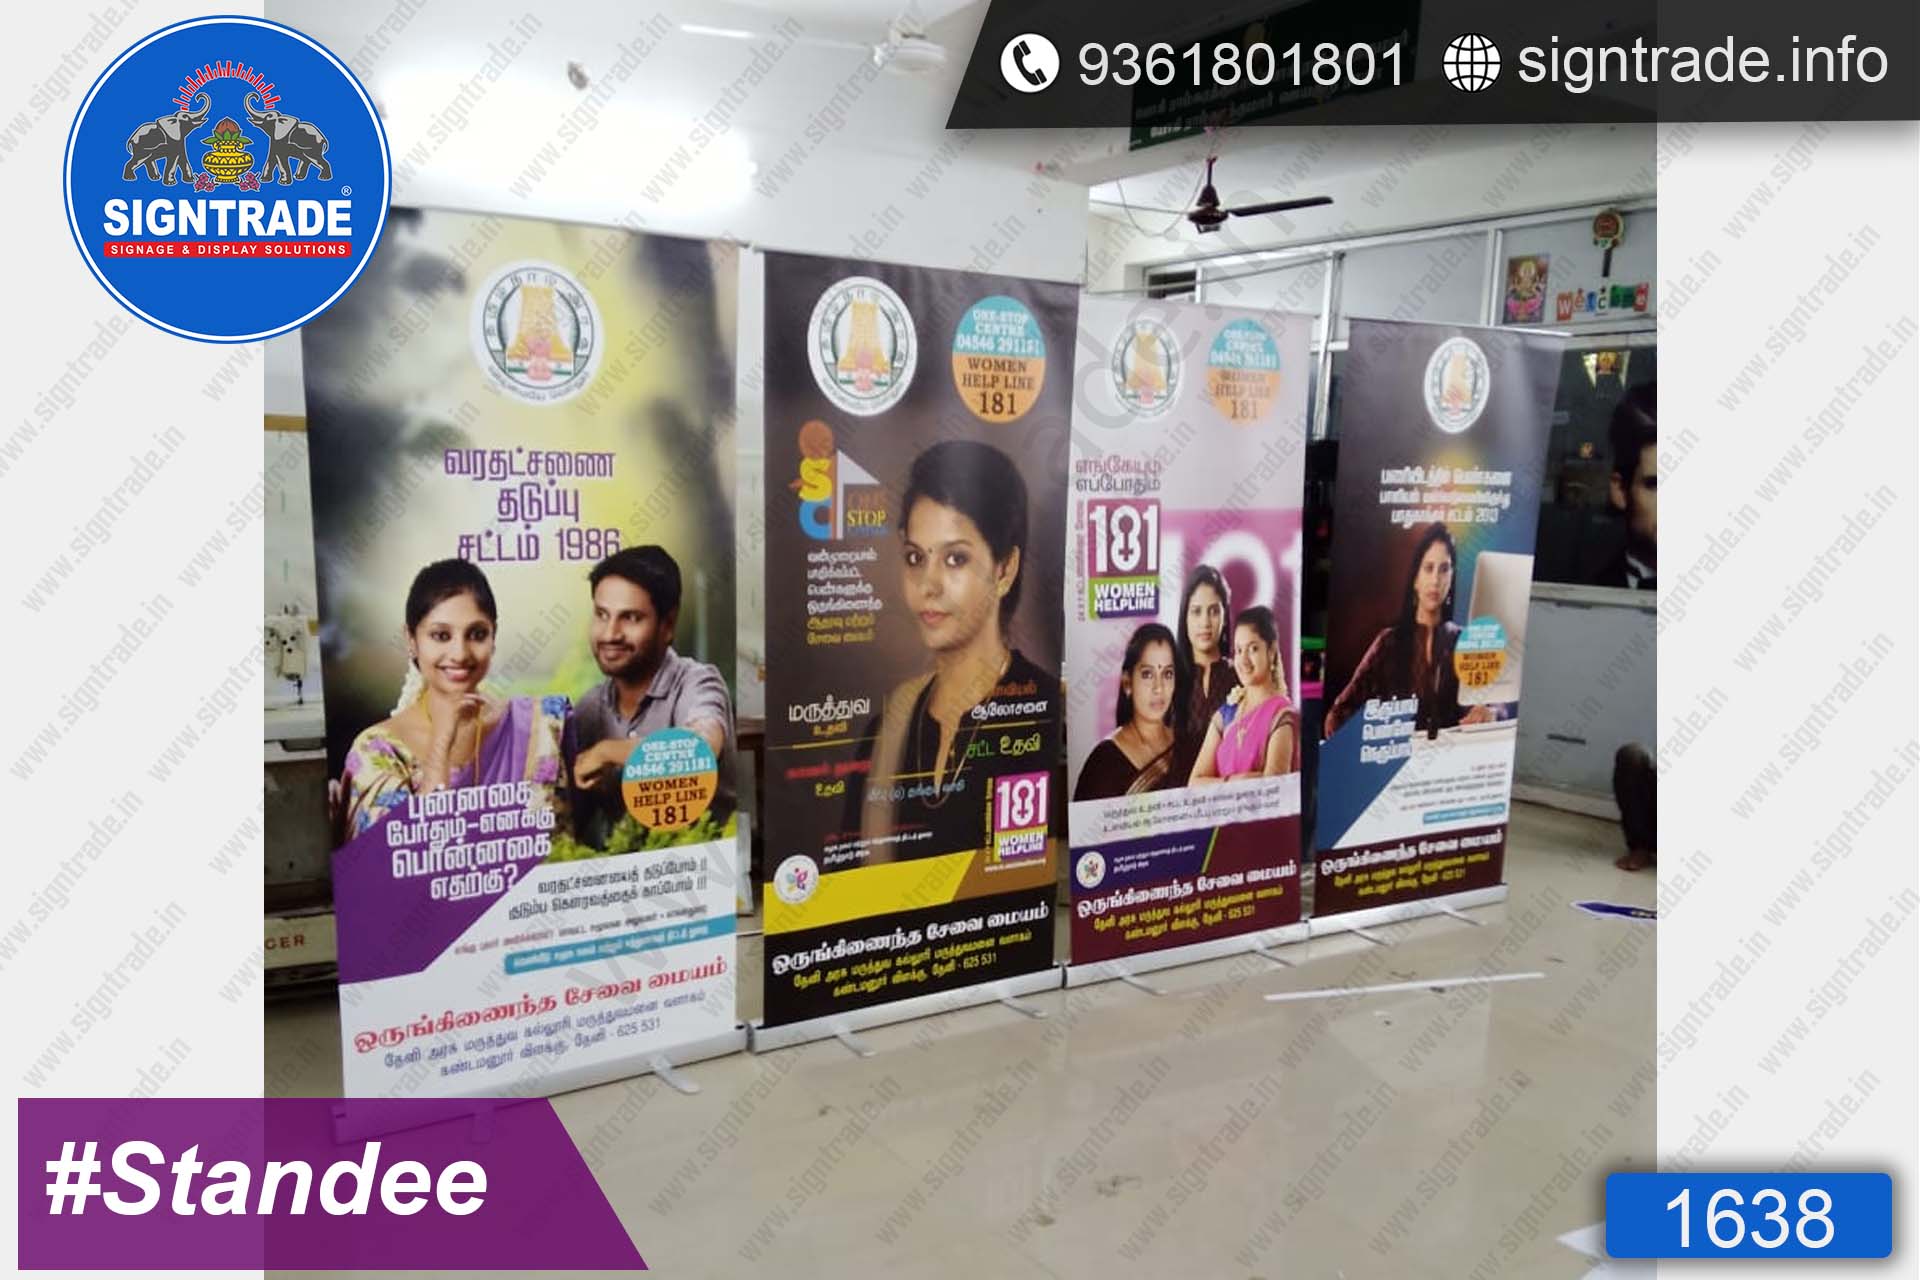 Social Service - Rollup Banner Stand - SIGNTRADE - Rollup Banner Stand Manufactures in Chennai